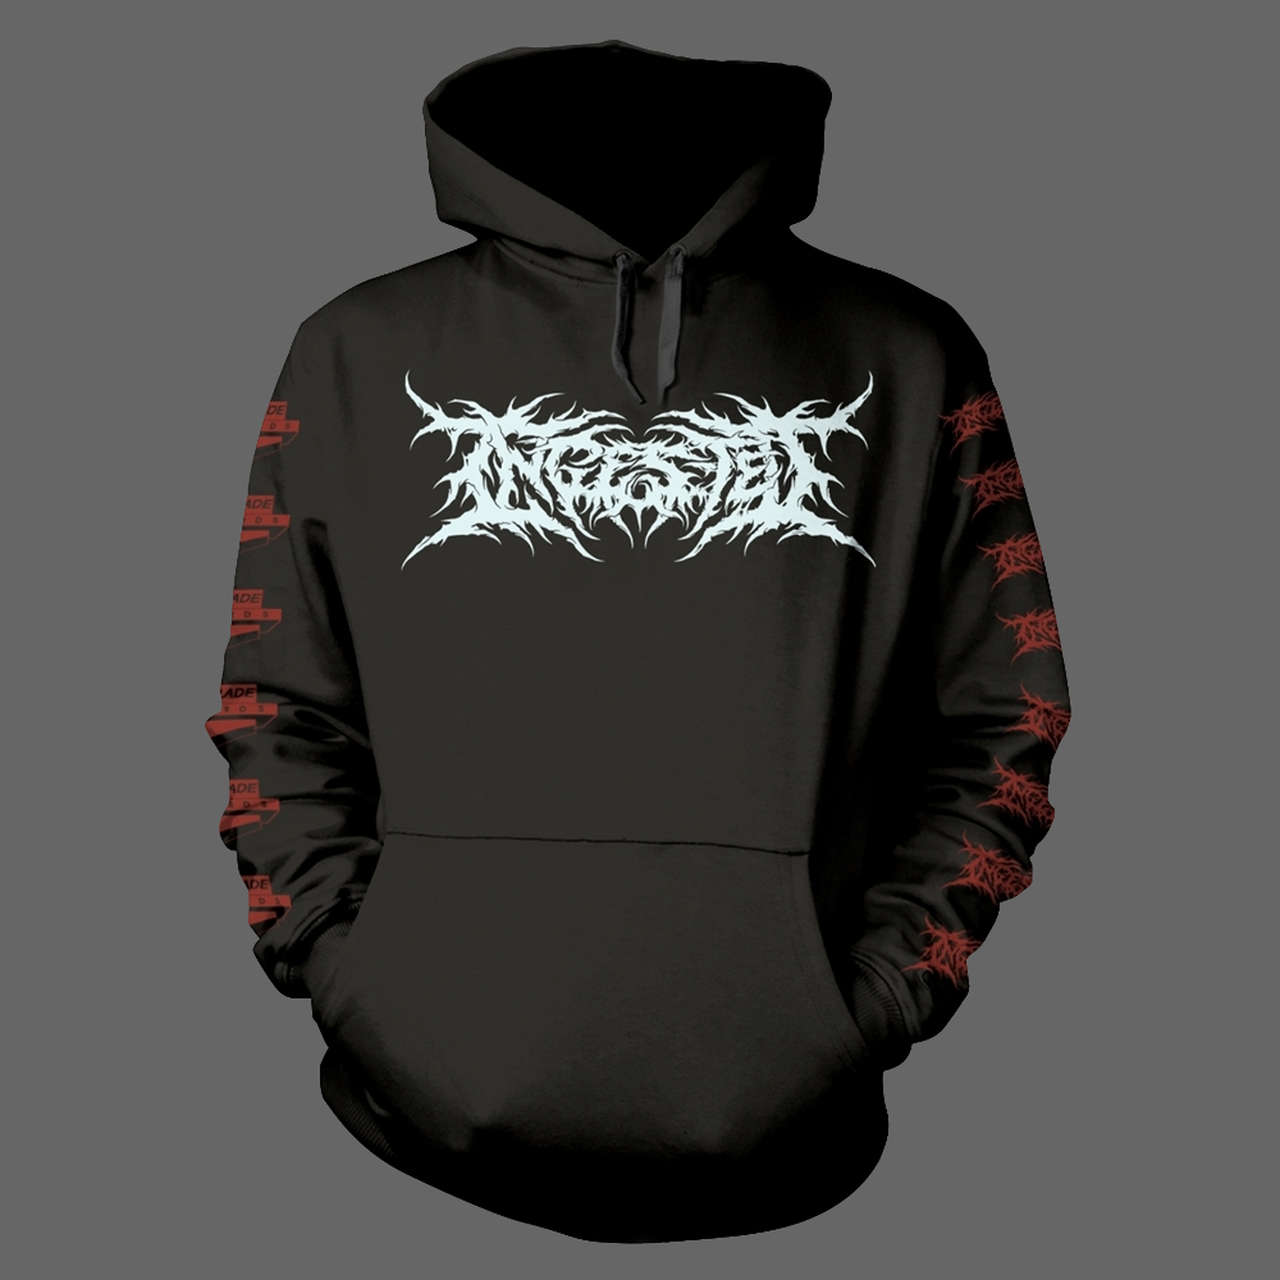 Ingested - The Tide of Death and Fractured Dreams (Hoodie)